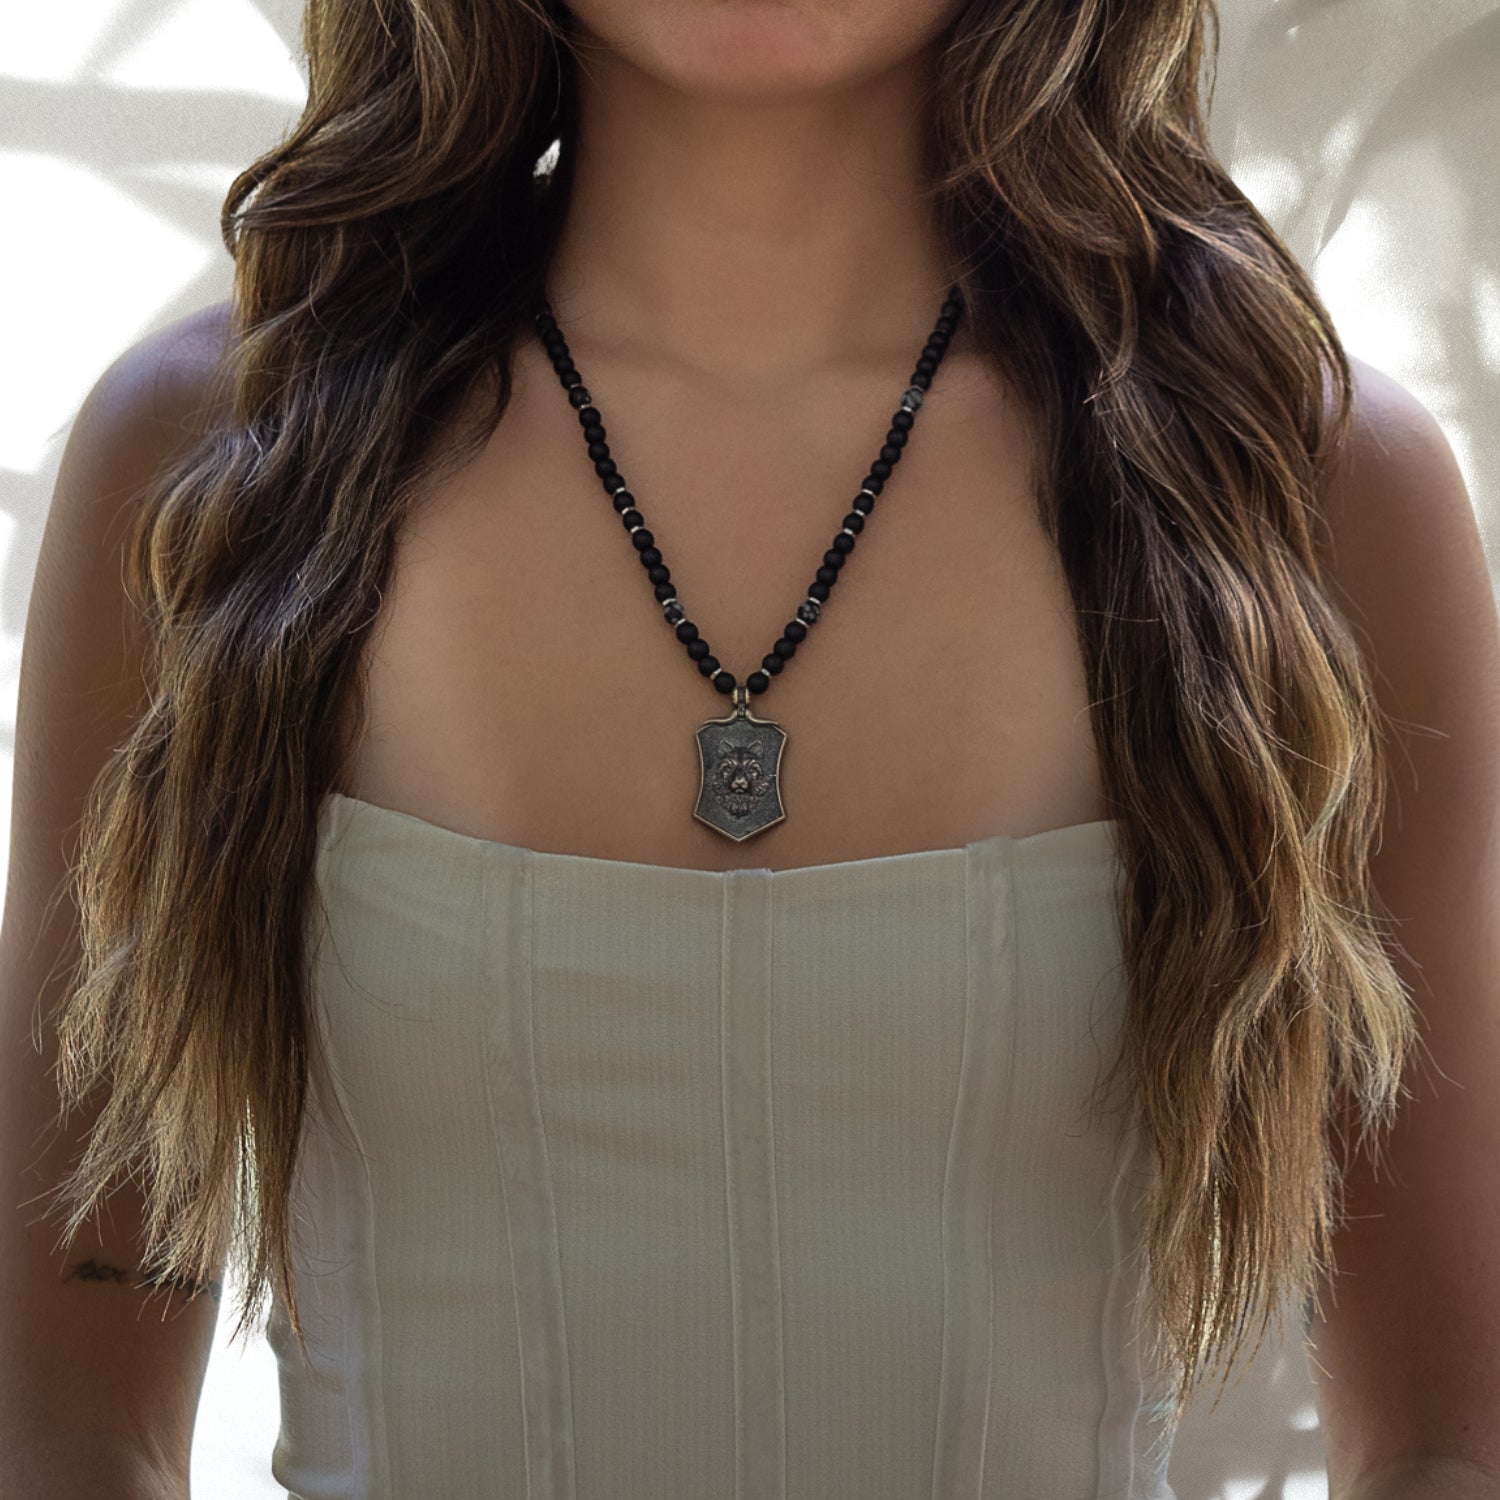 The model exudes confidence while wearing the Spirit Onyx Wolf Necklace, embodying the strength and spirit of the wolf.